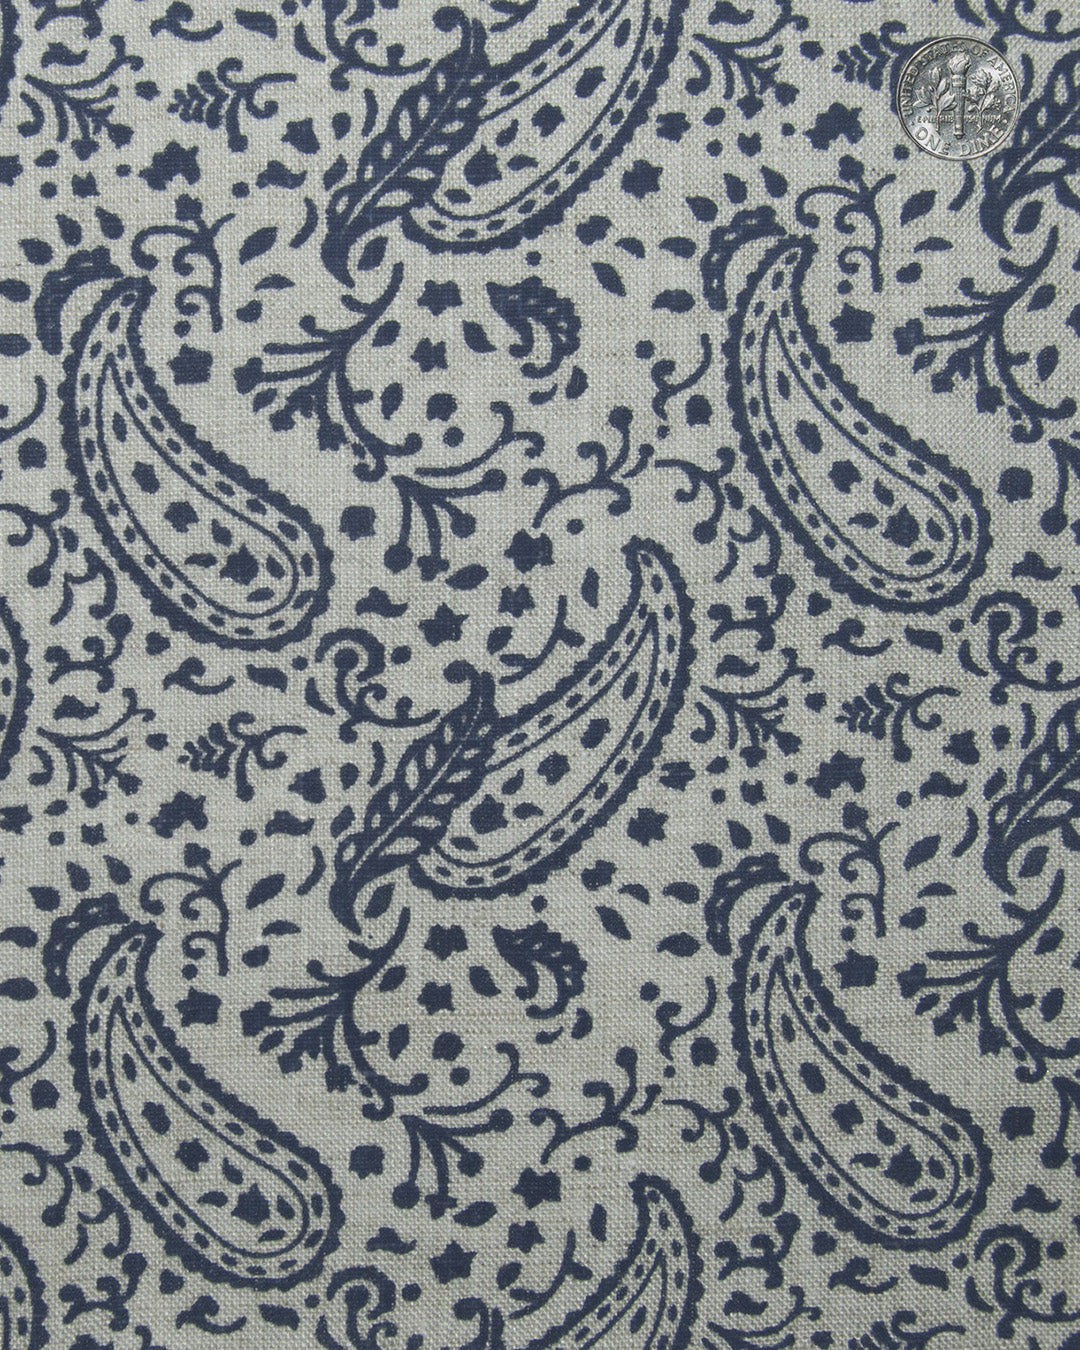 Camp collar PRESET STYLE in Linen: Navy Printed Paisley